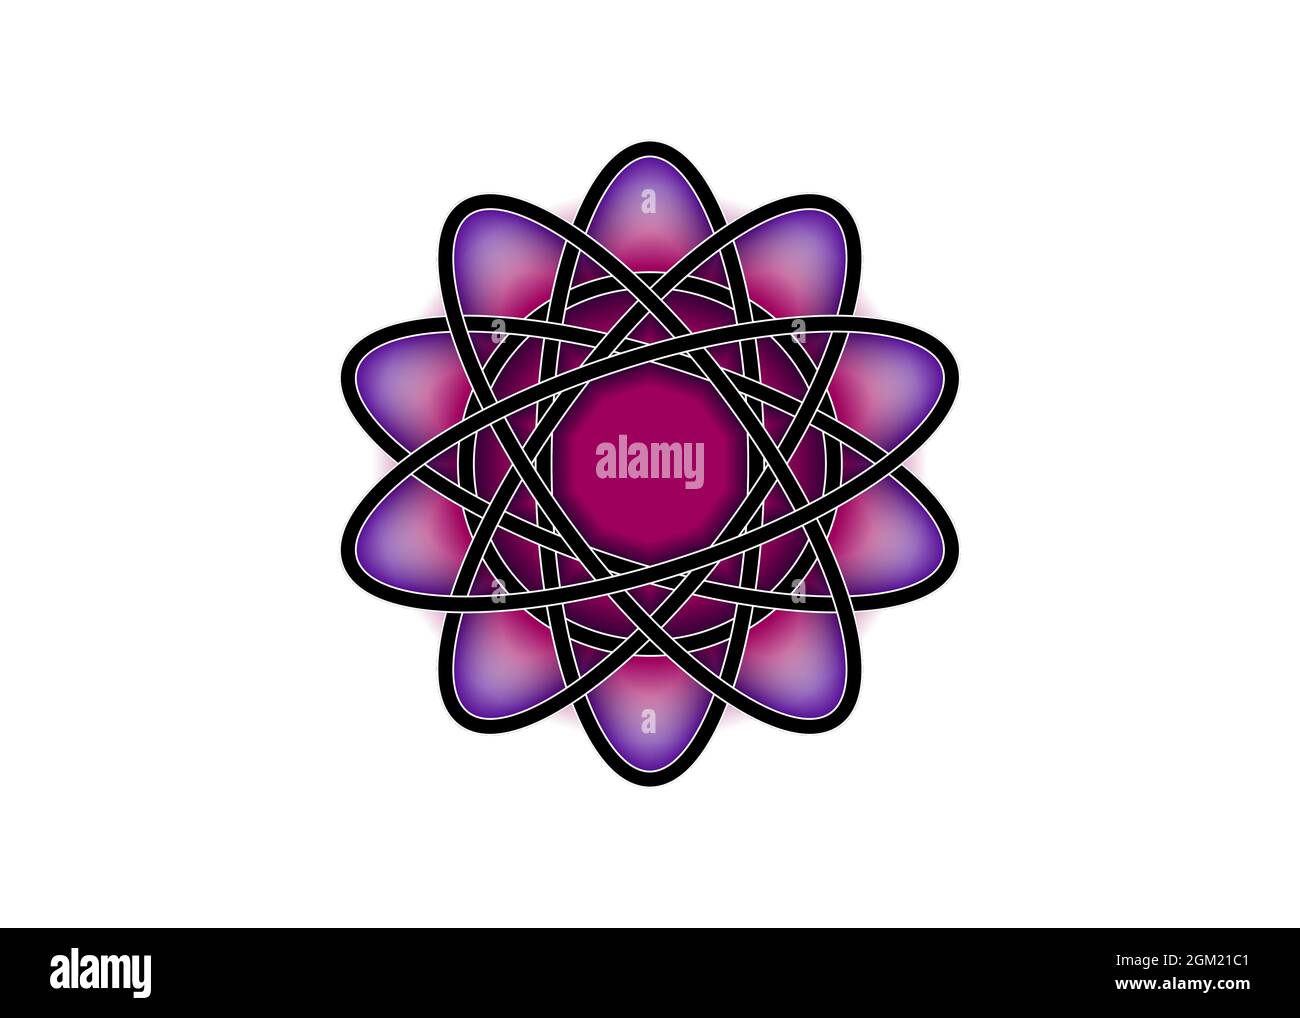 Pictograph of atom. Purple logo template in Celtic knot style on white background. Tribal symbol in circular mandala form Tattoo sign ornament element Stock Vector